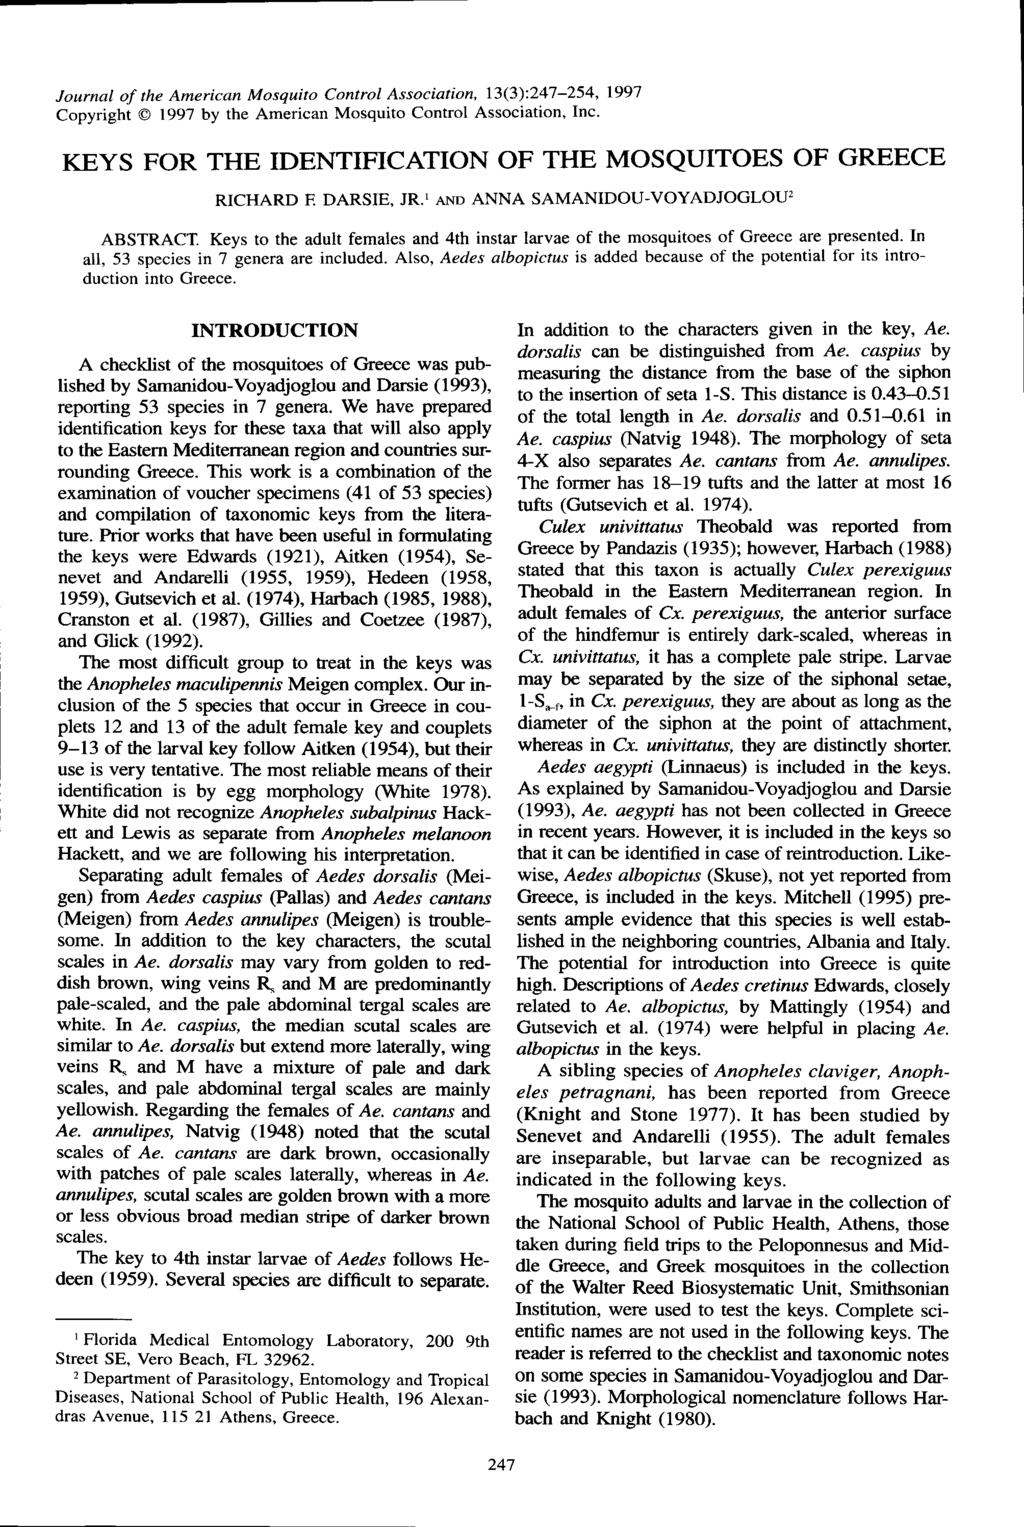 Journal of the American Mosquito Control Association, 13(3):247-254' 1997 Copyright @ 1997 by the American Mosquito Control Association, Inc.